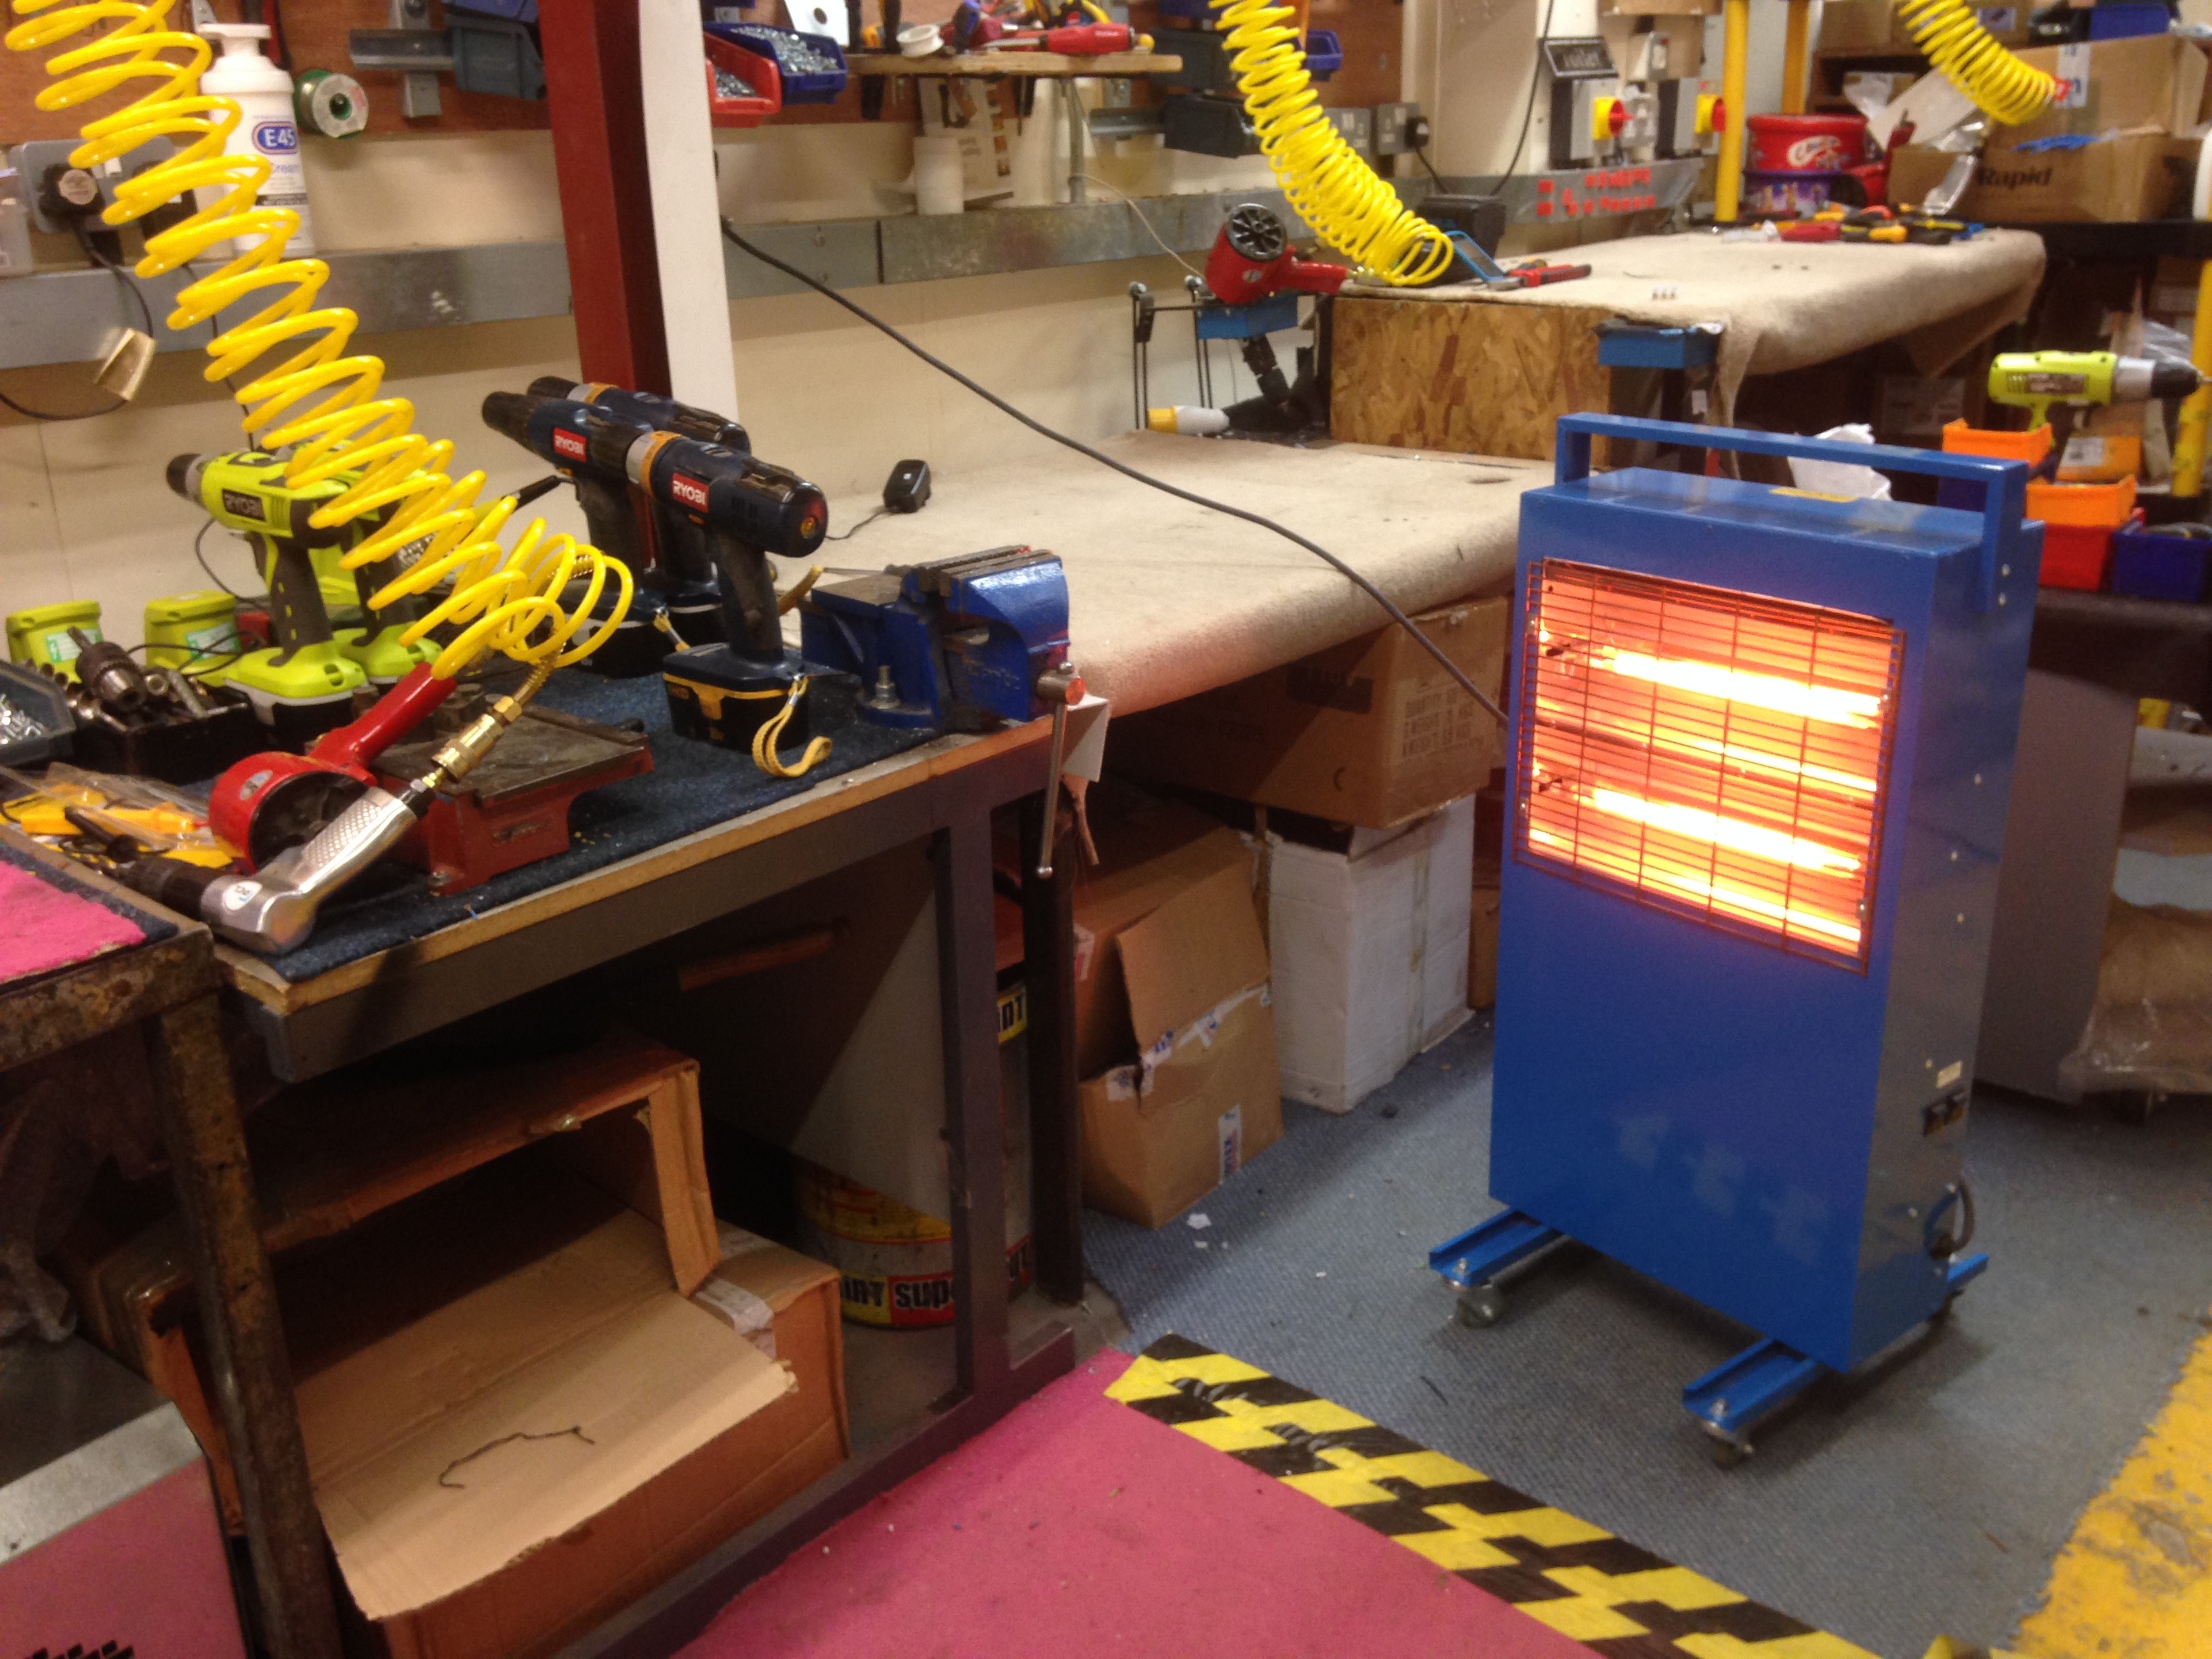 RG308 1.6kw Infrared Electric Heater 